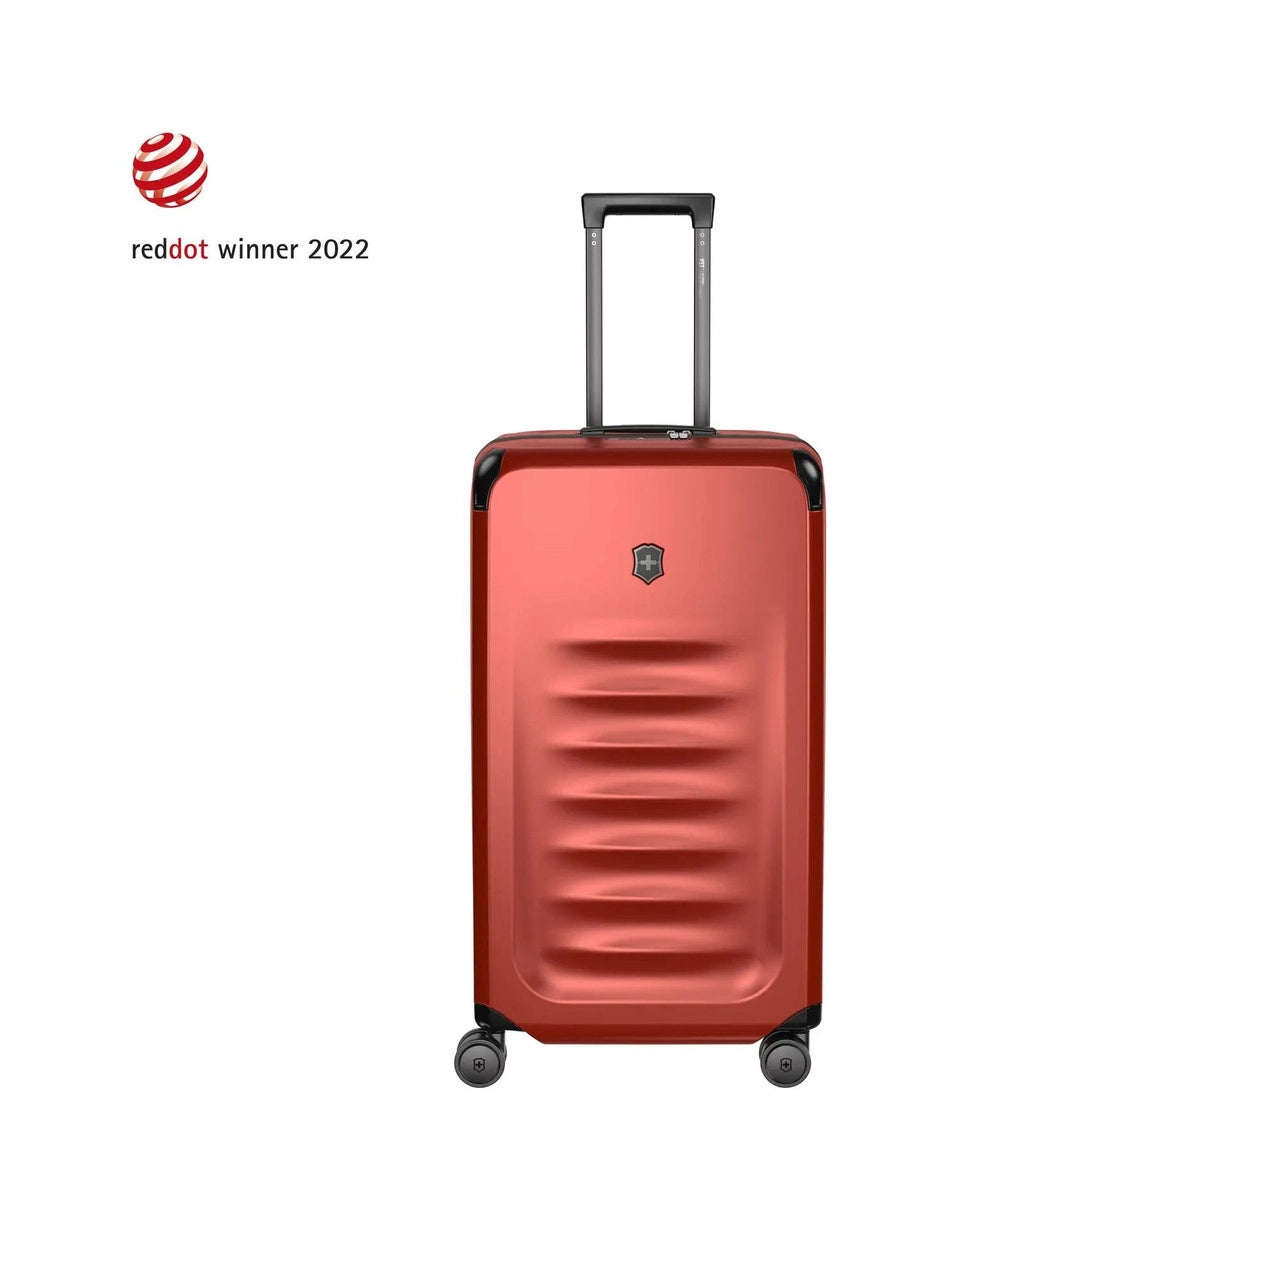 VICTORINOX SPECTRA 3.0 TRUNK LARGE RED